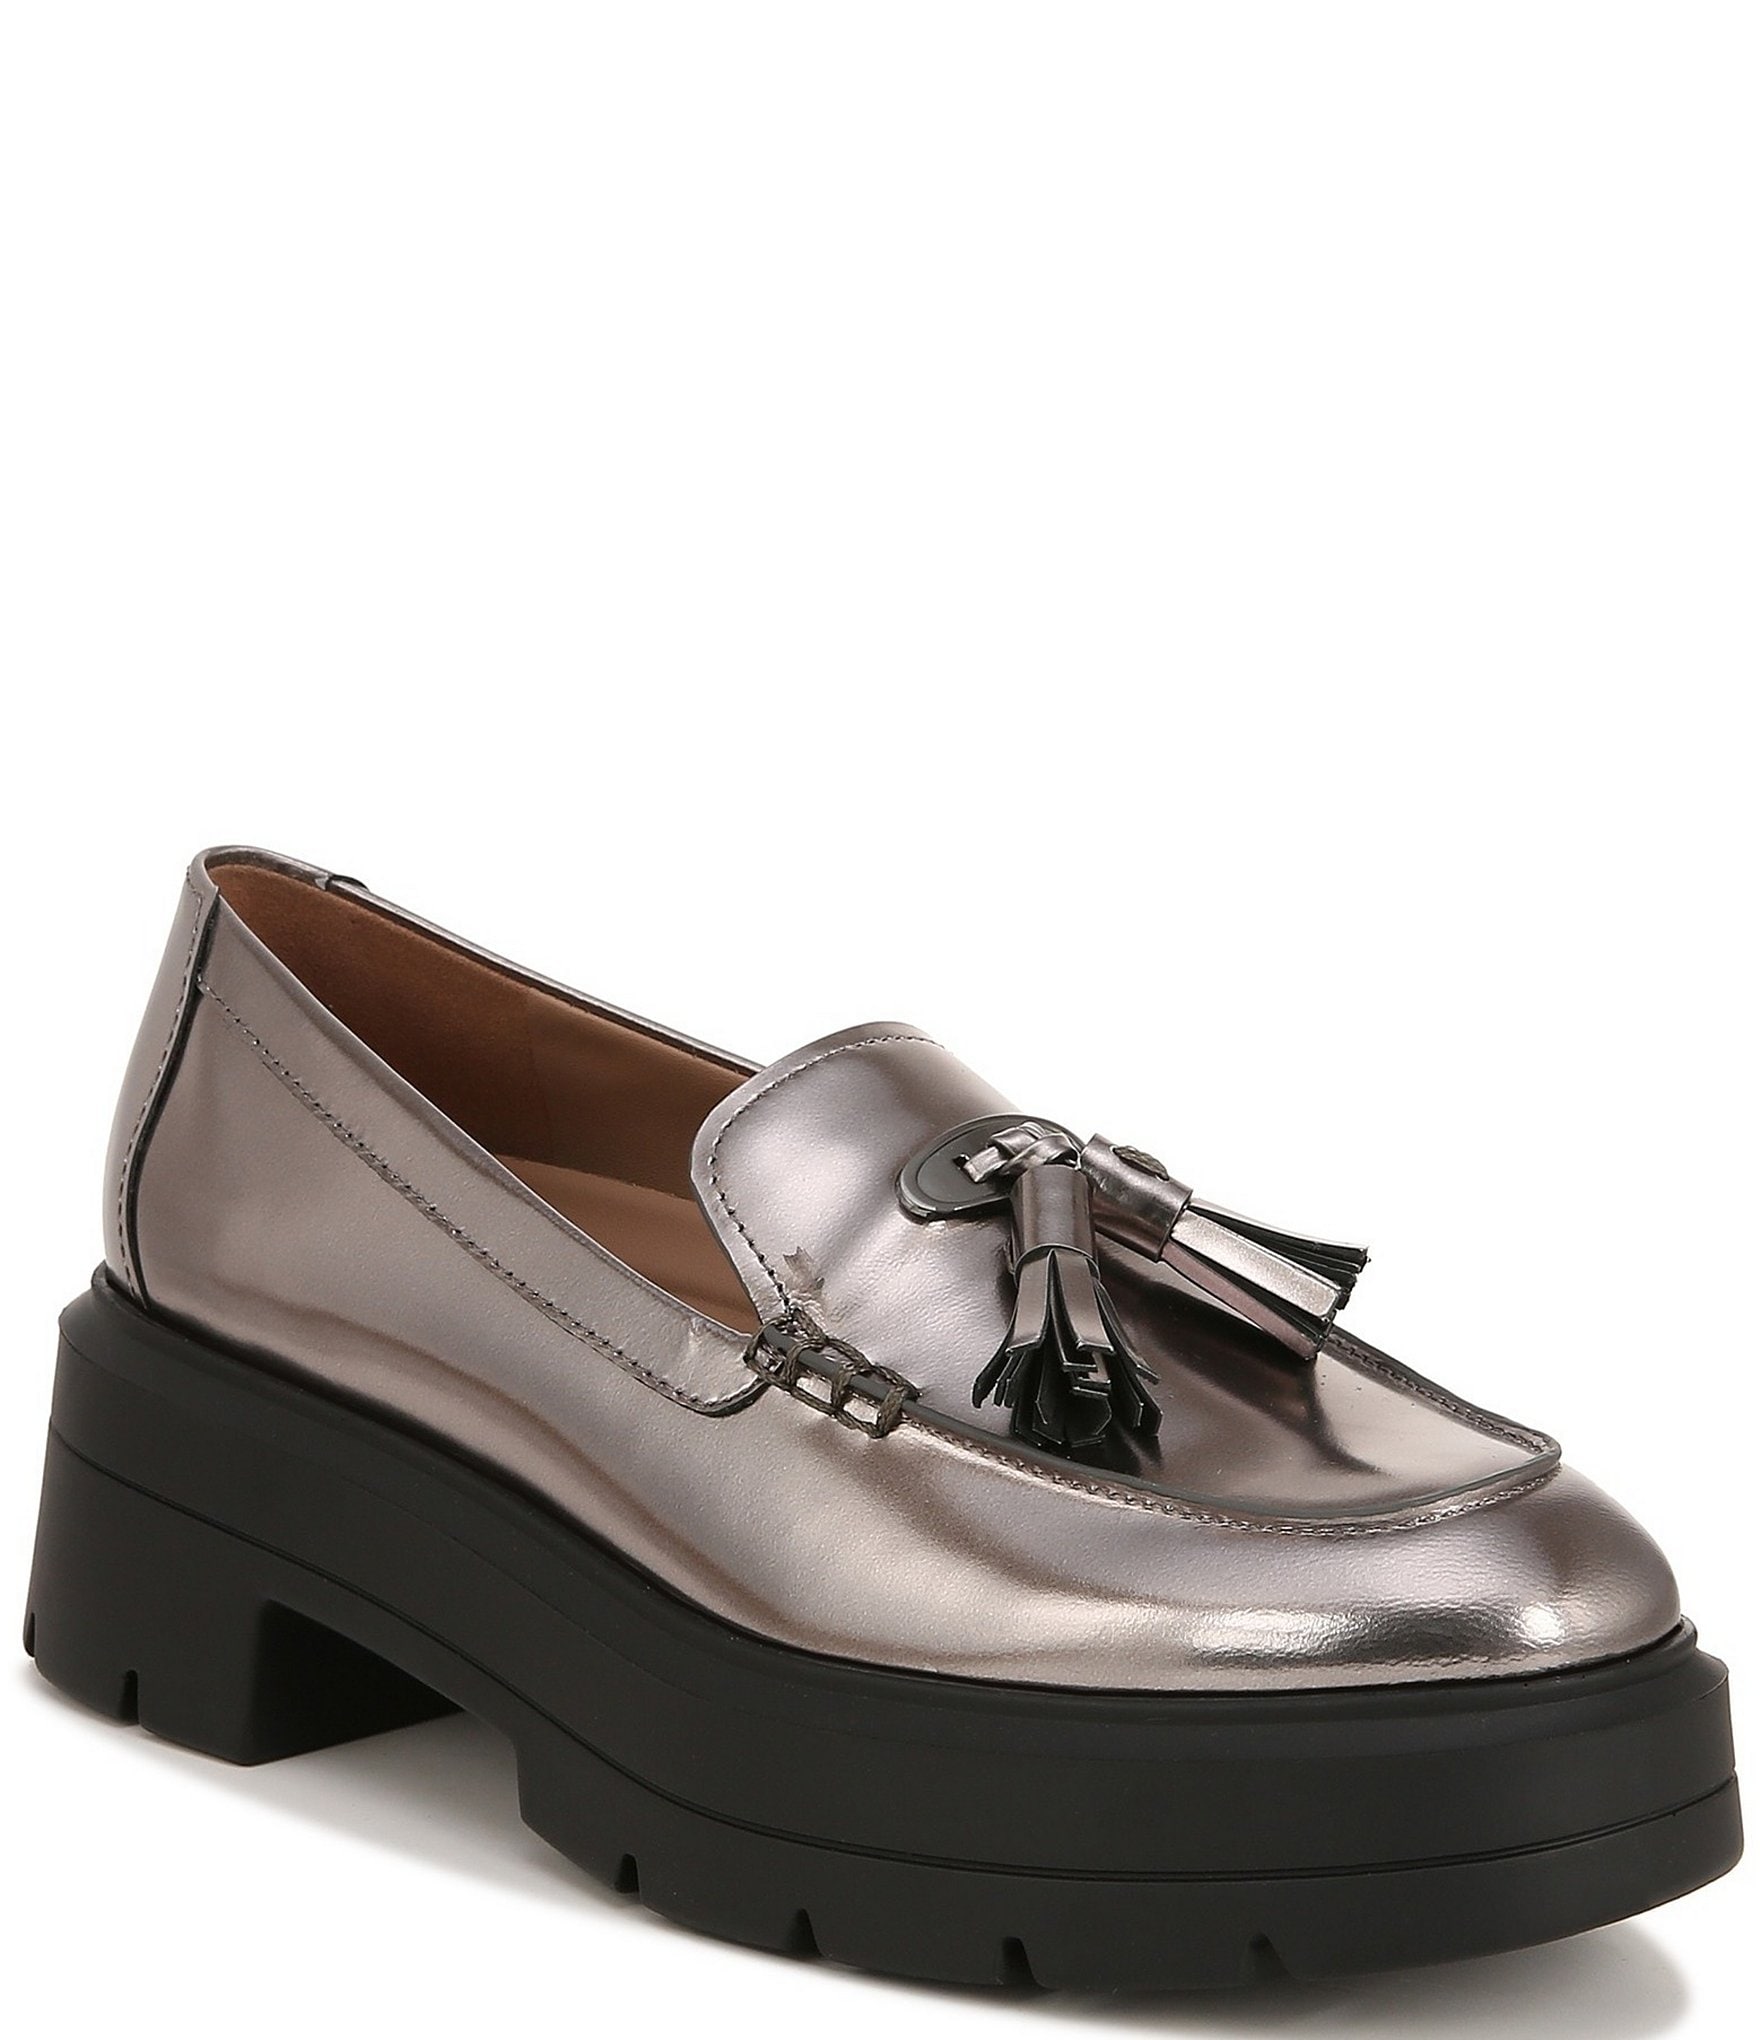 Zapatos Tipo Loafer Para Mujer Con Plataforma - Ref. Z-2764 - DFV Leather  Shoes & Bags